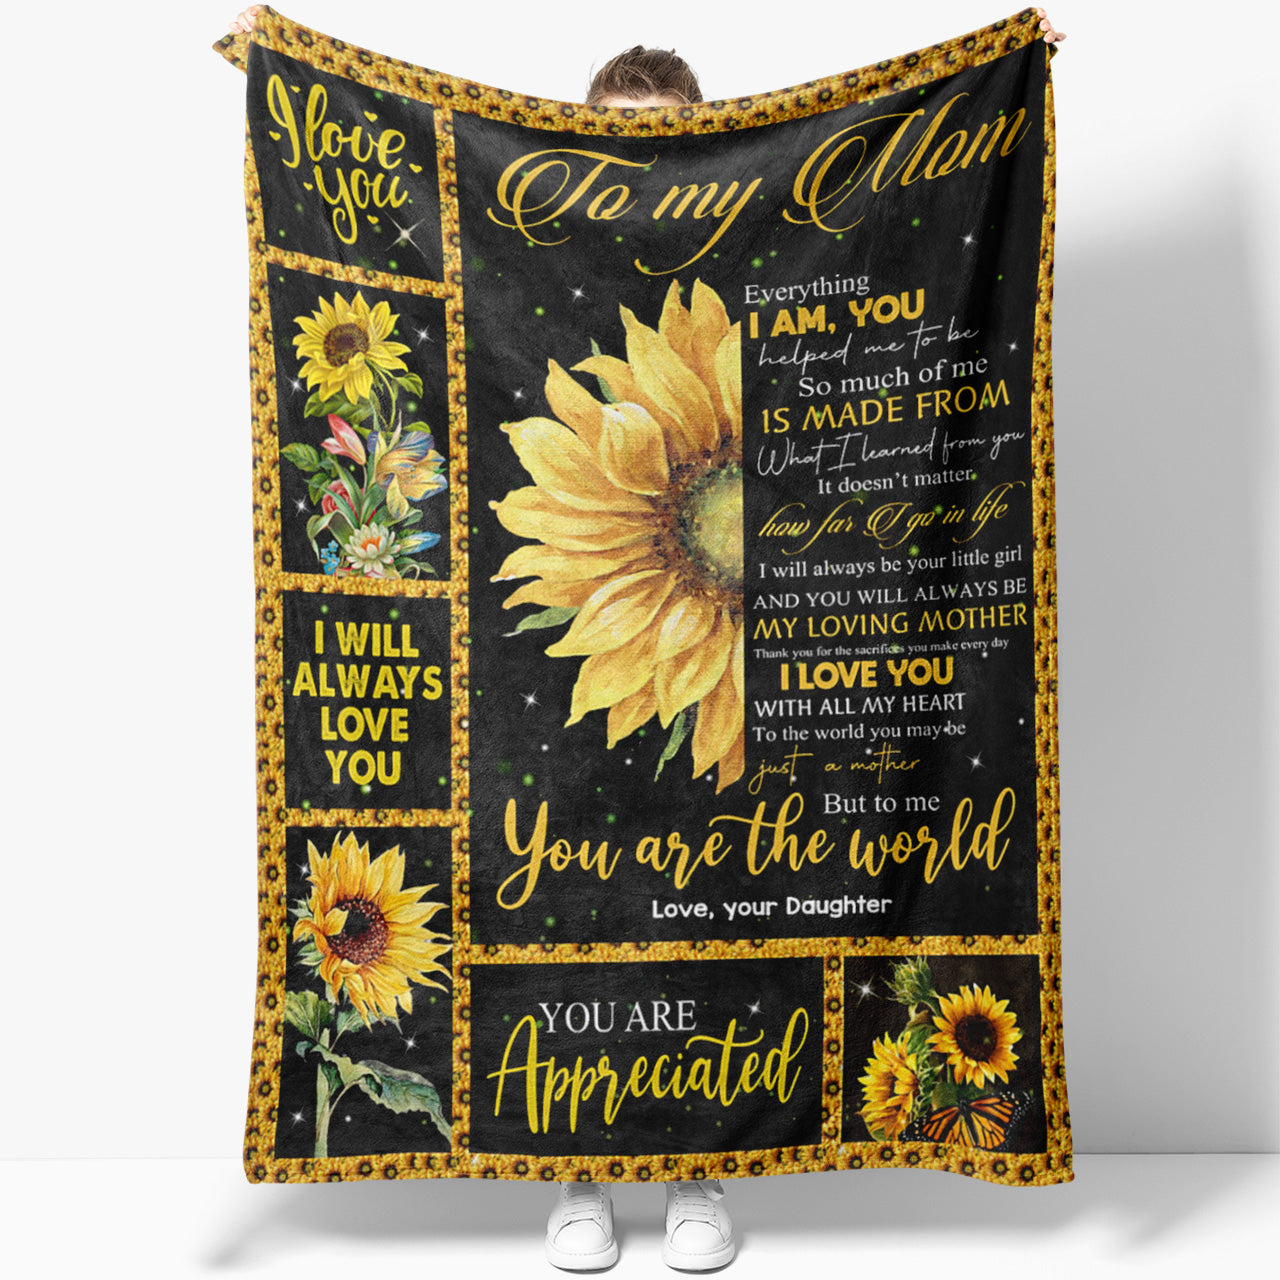 Blanket Gift ideas For Mom, Christmas Gifts For Mom, I Am, Mothers